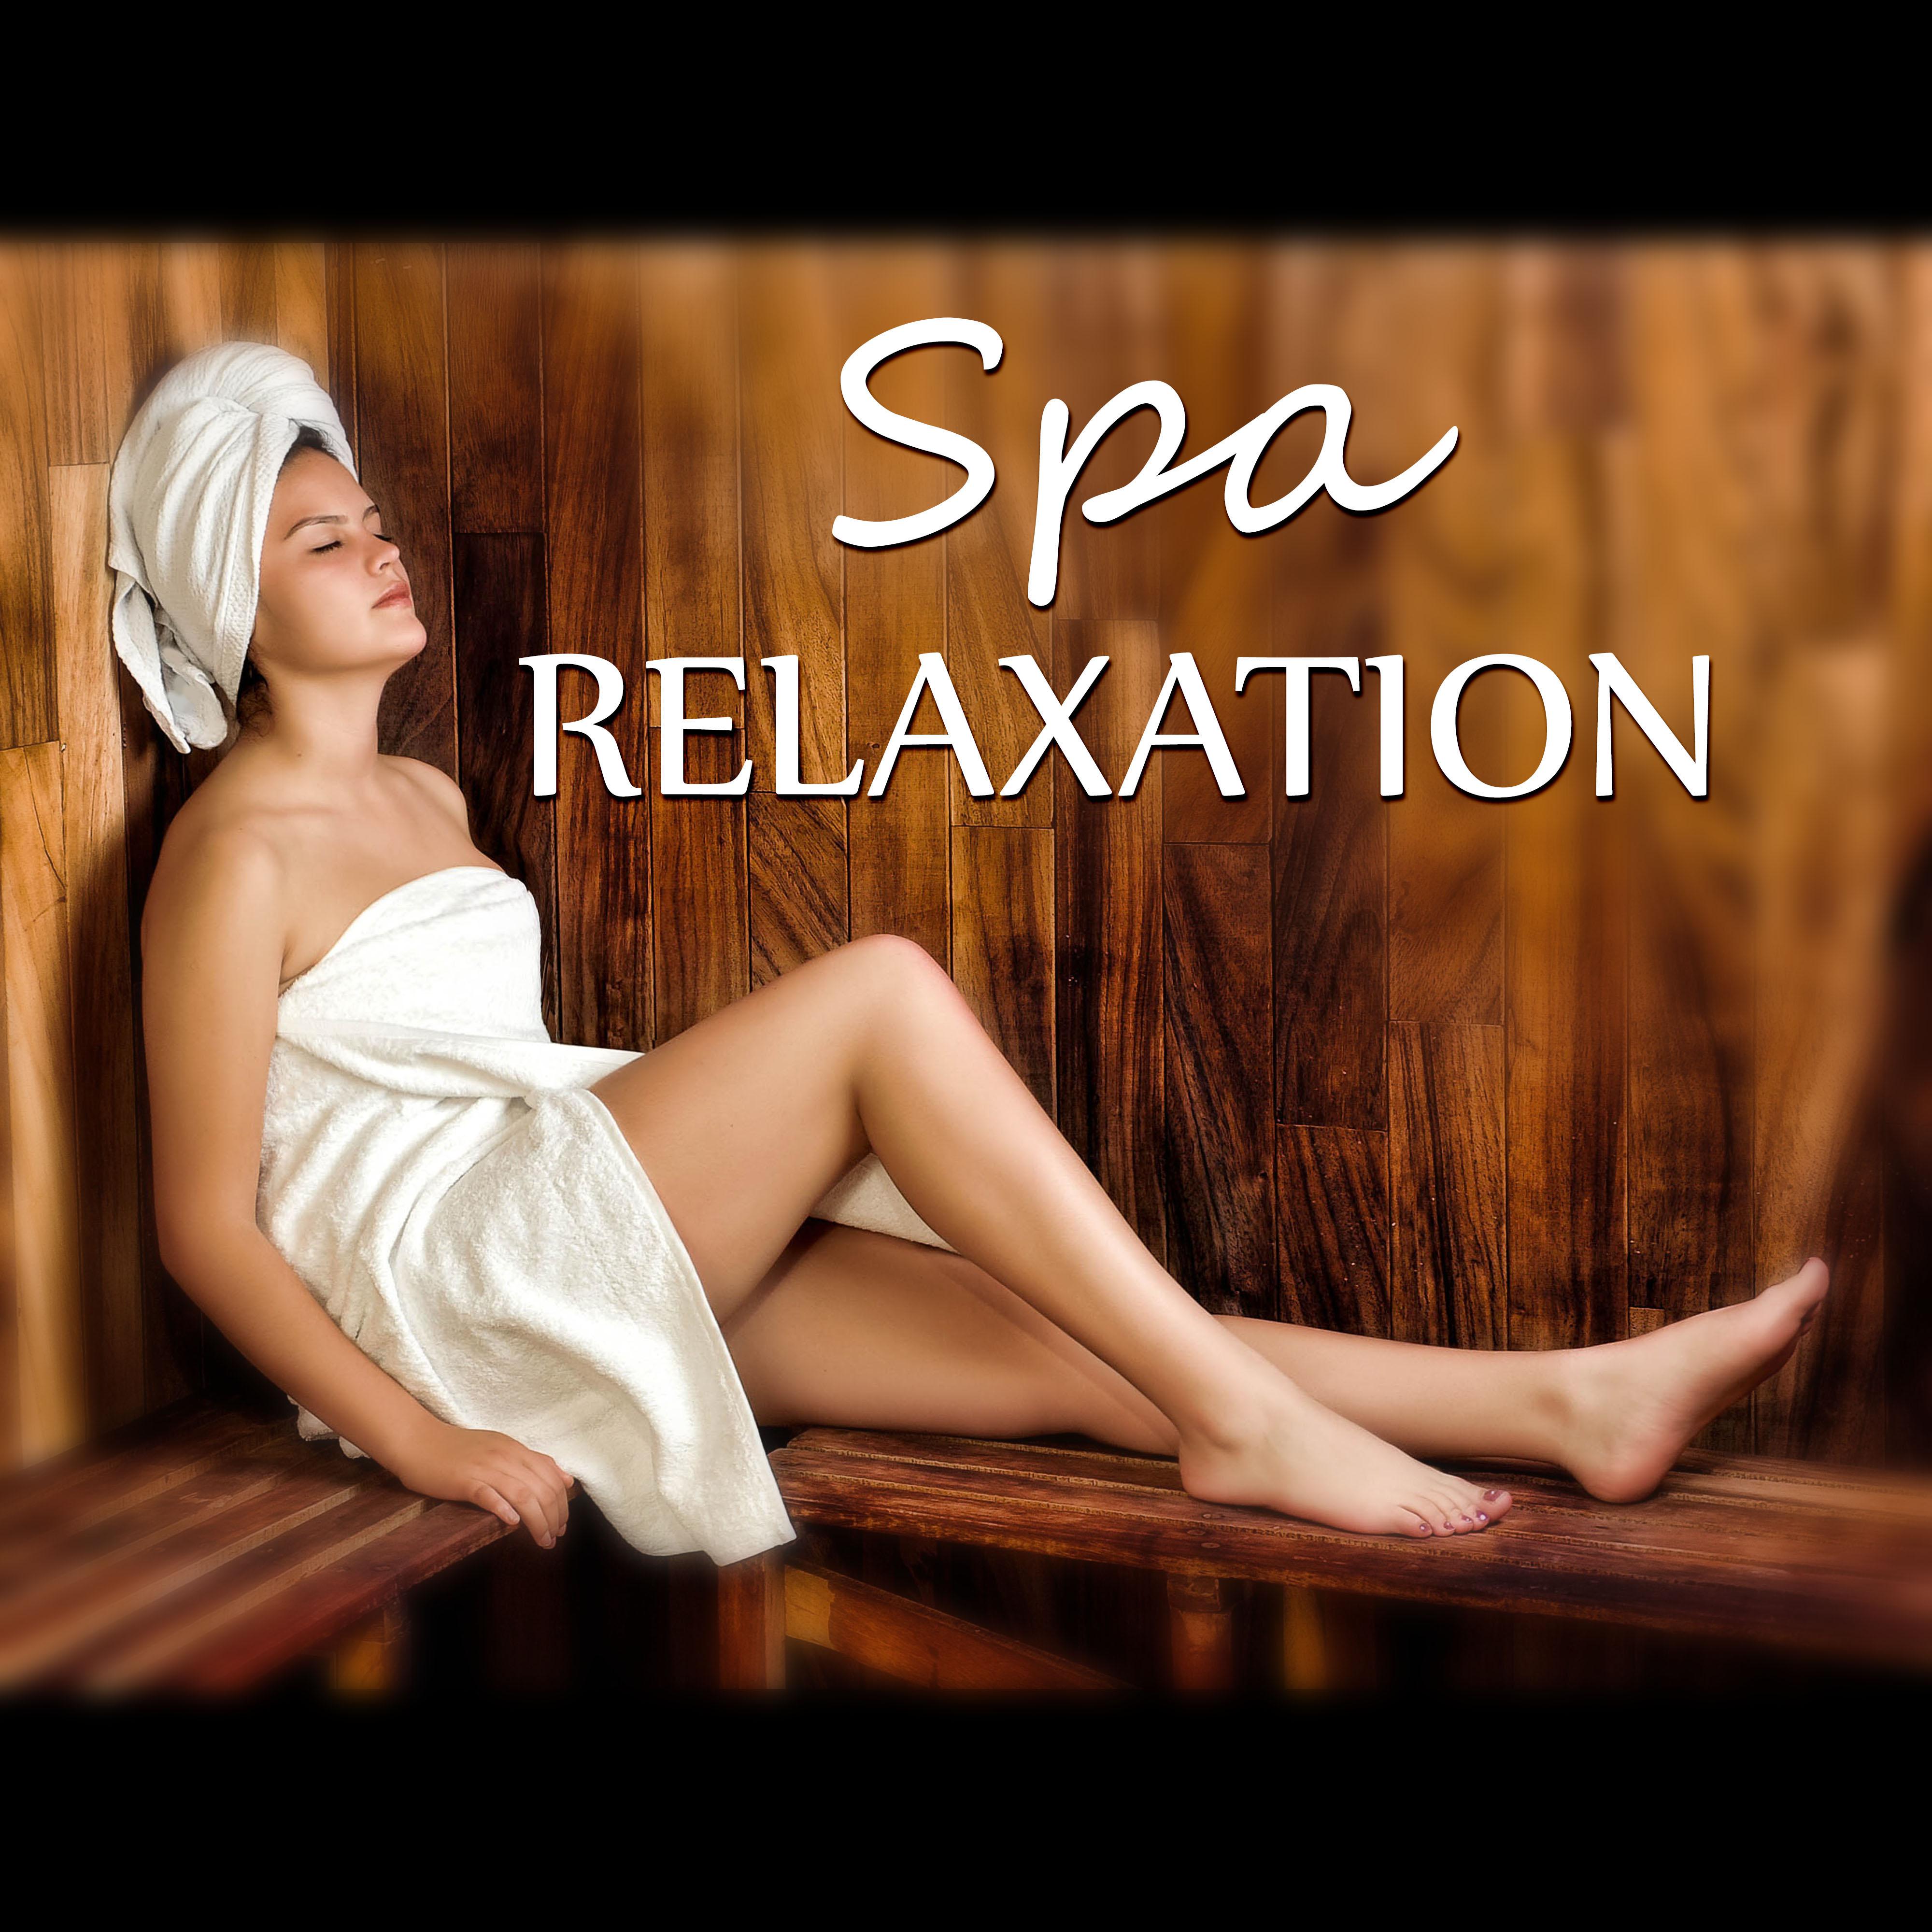 Spa Relaxation – Rain, Bliss Spa, Restful Sleep, New Age, Nature Sounds, Music for Massage, Ocean Waves